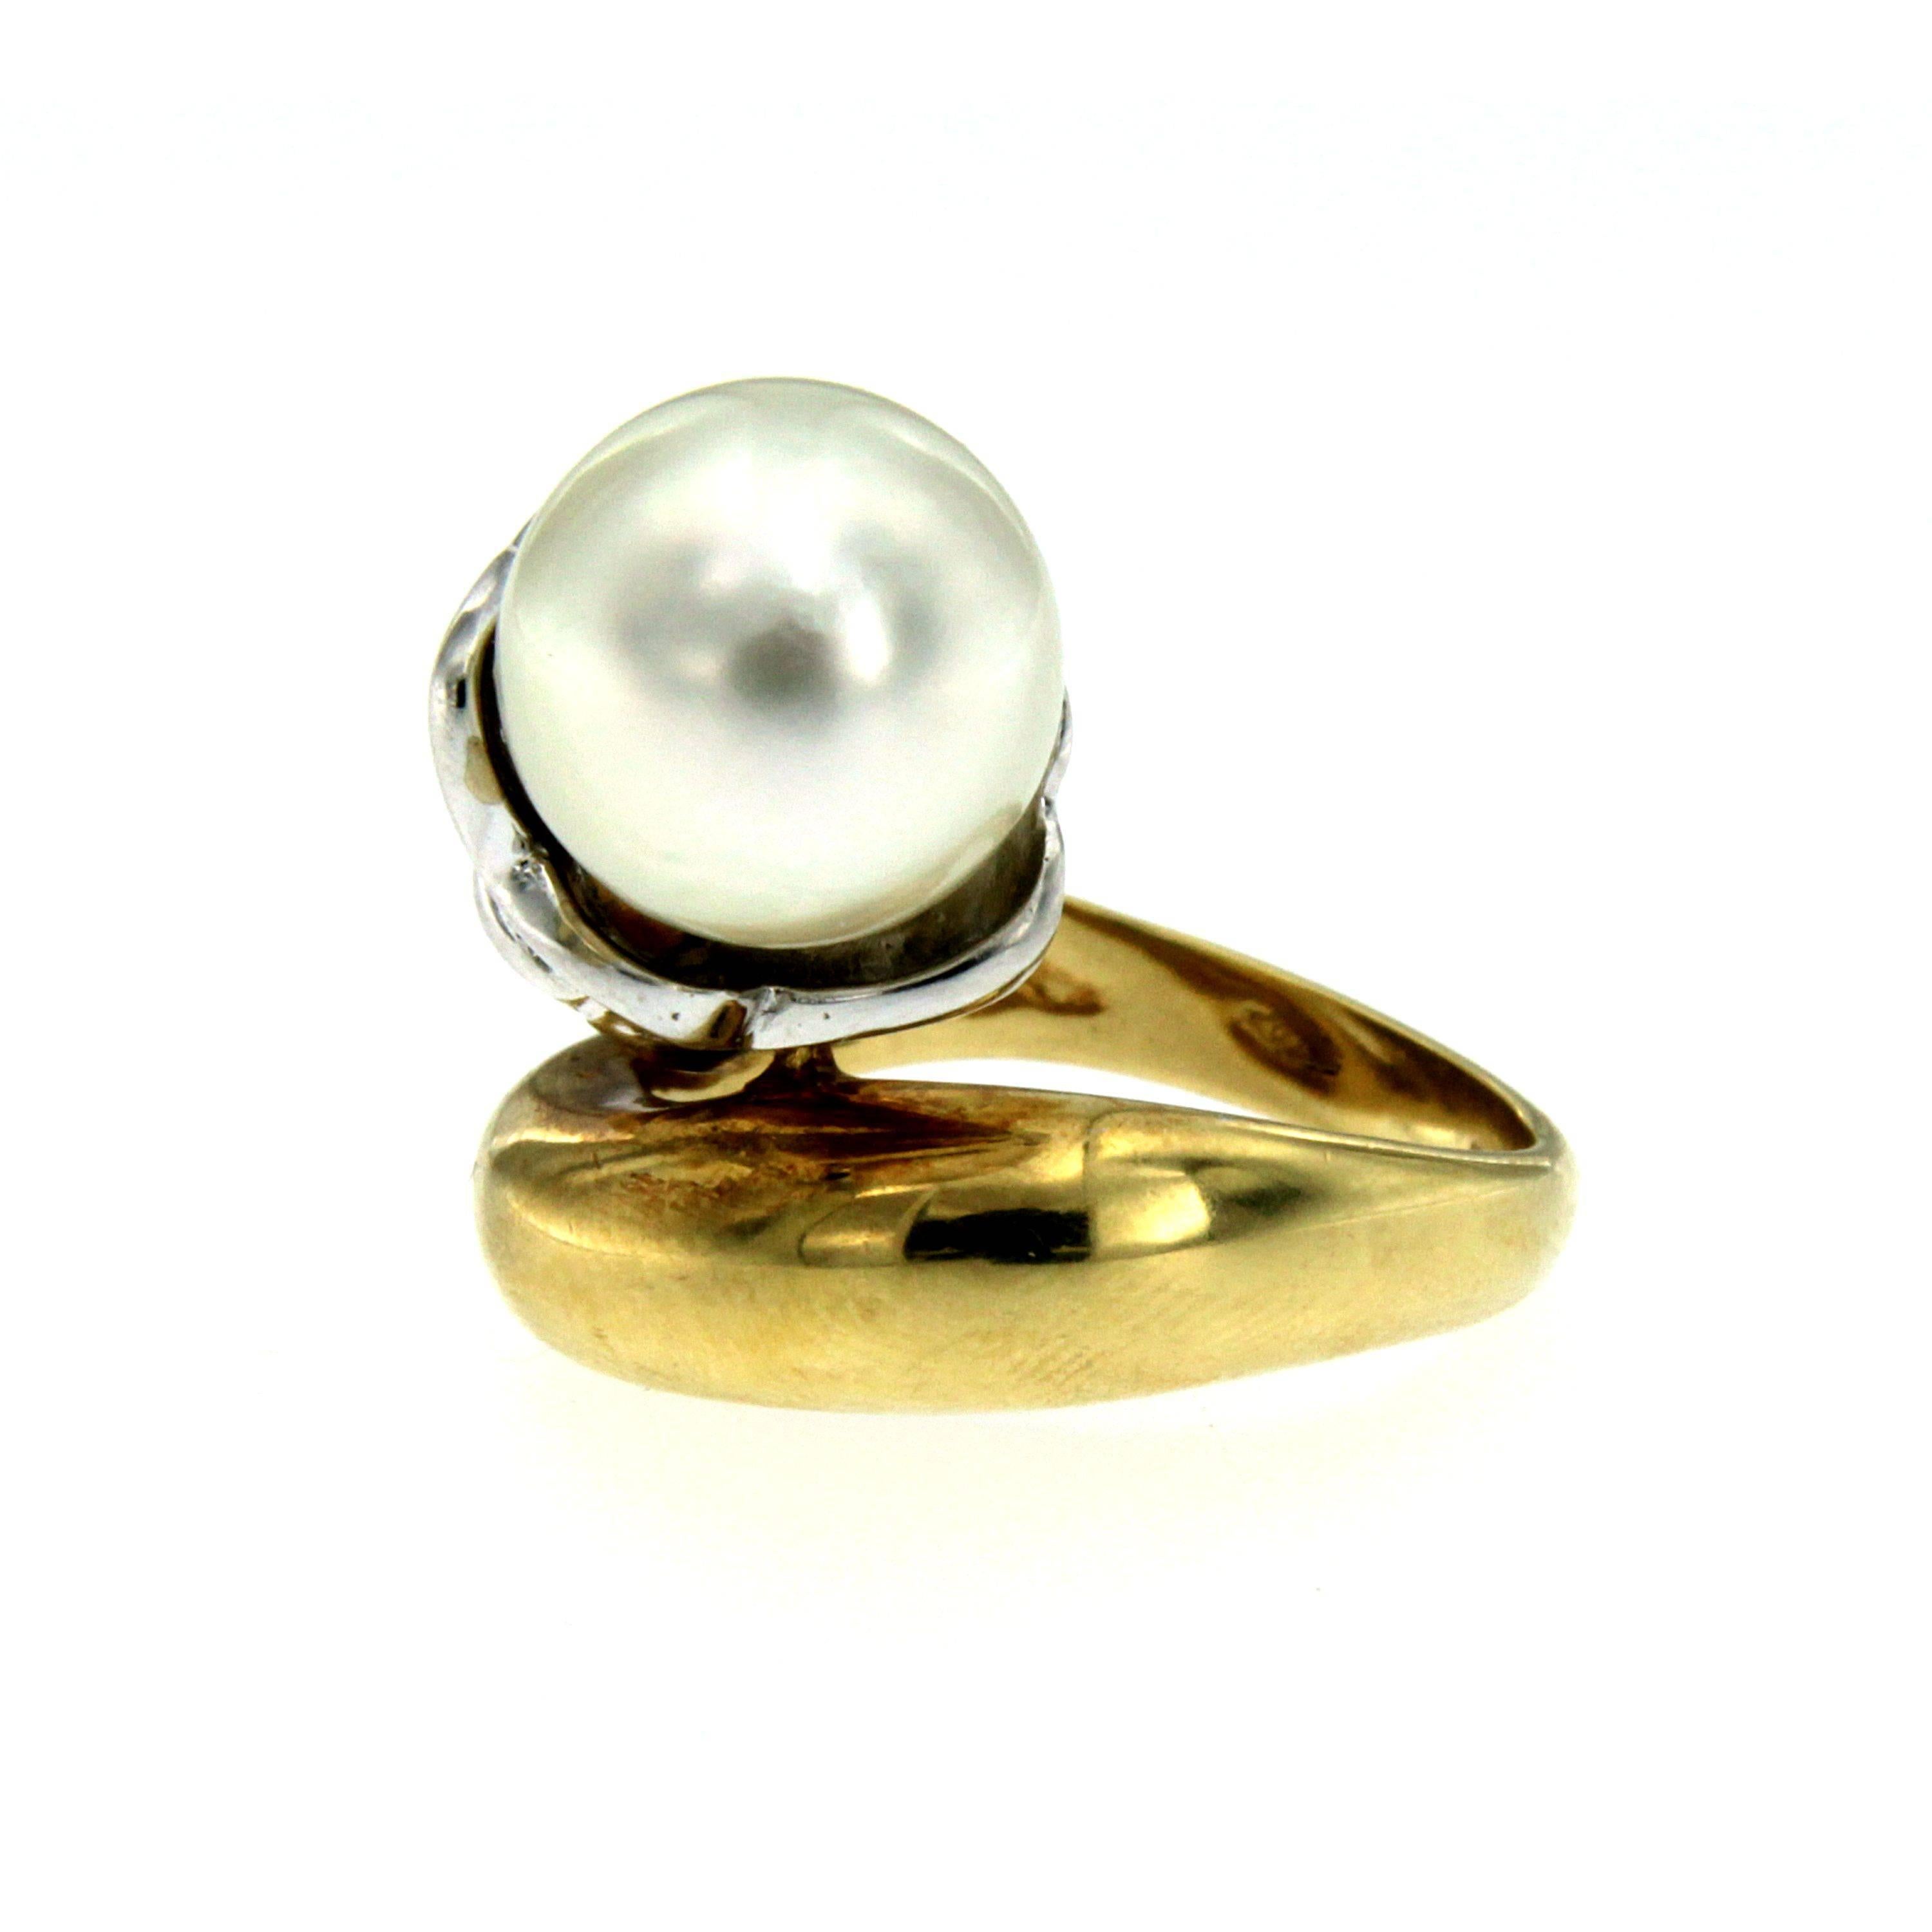 An original and unique cocktail retro ring set in 18K yellow and white gold hand worked into a gorgeous blooming flower. The ring features a center 11mm South Sea Pearl framed by .40ct of round brilliant cut diamonds.
This beautiful ring dates to